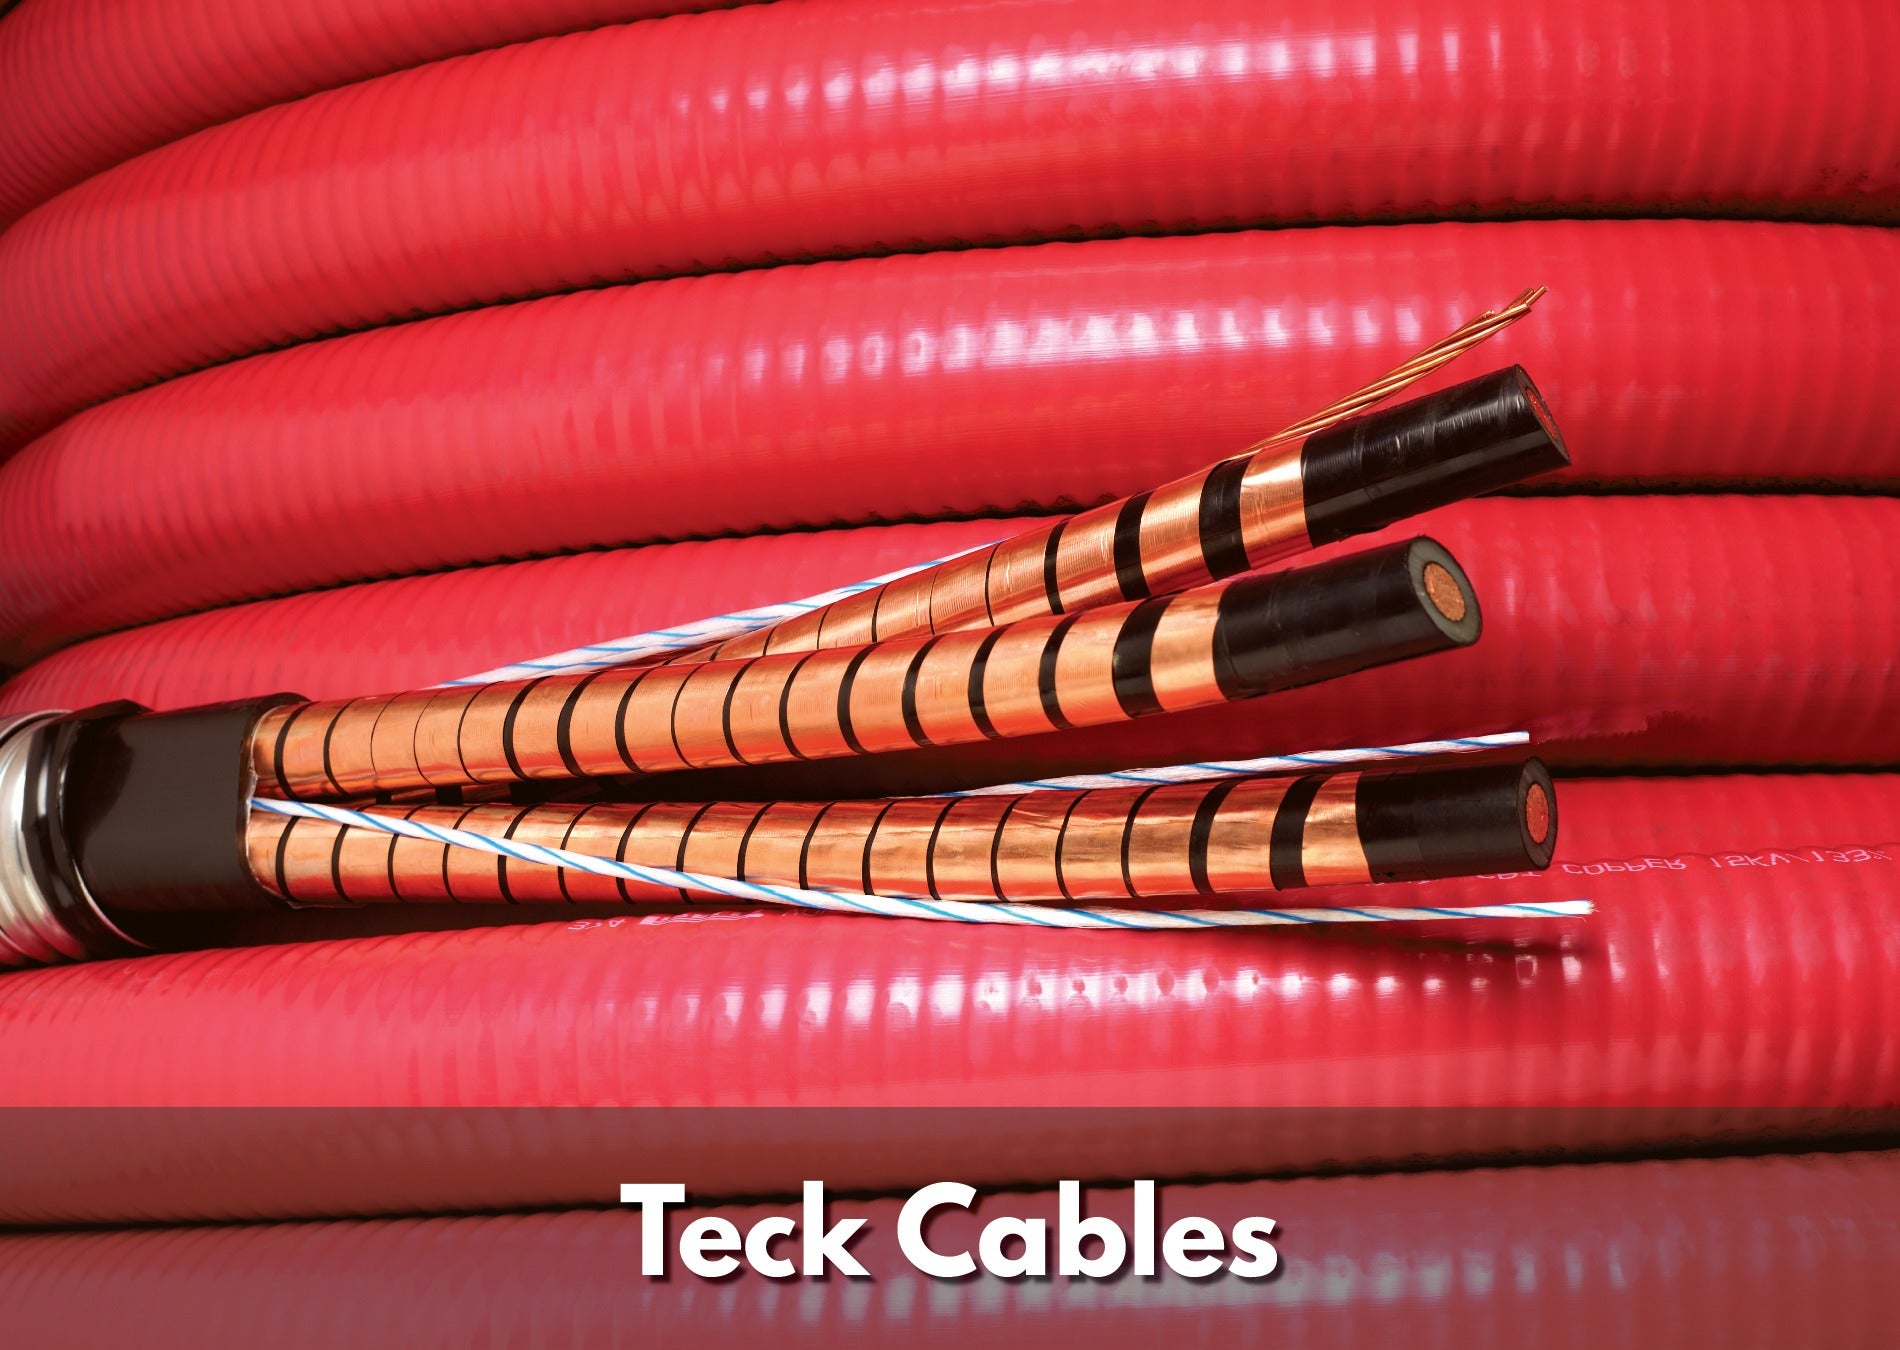 Texcan - View All Products - Teck cable .jpg